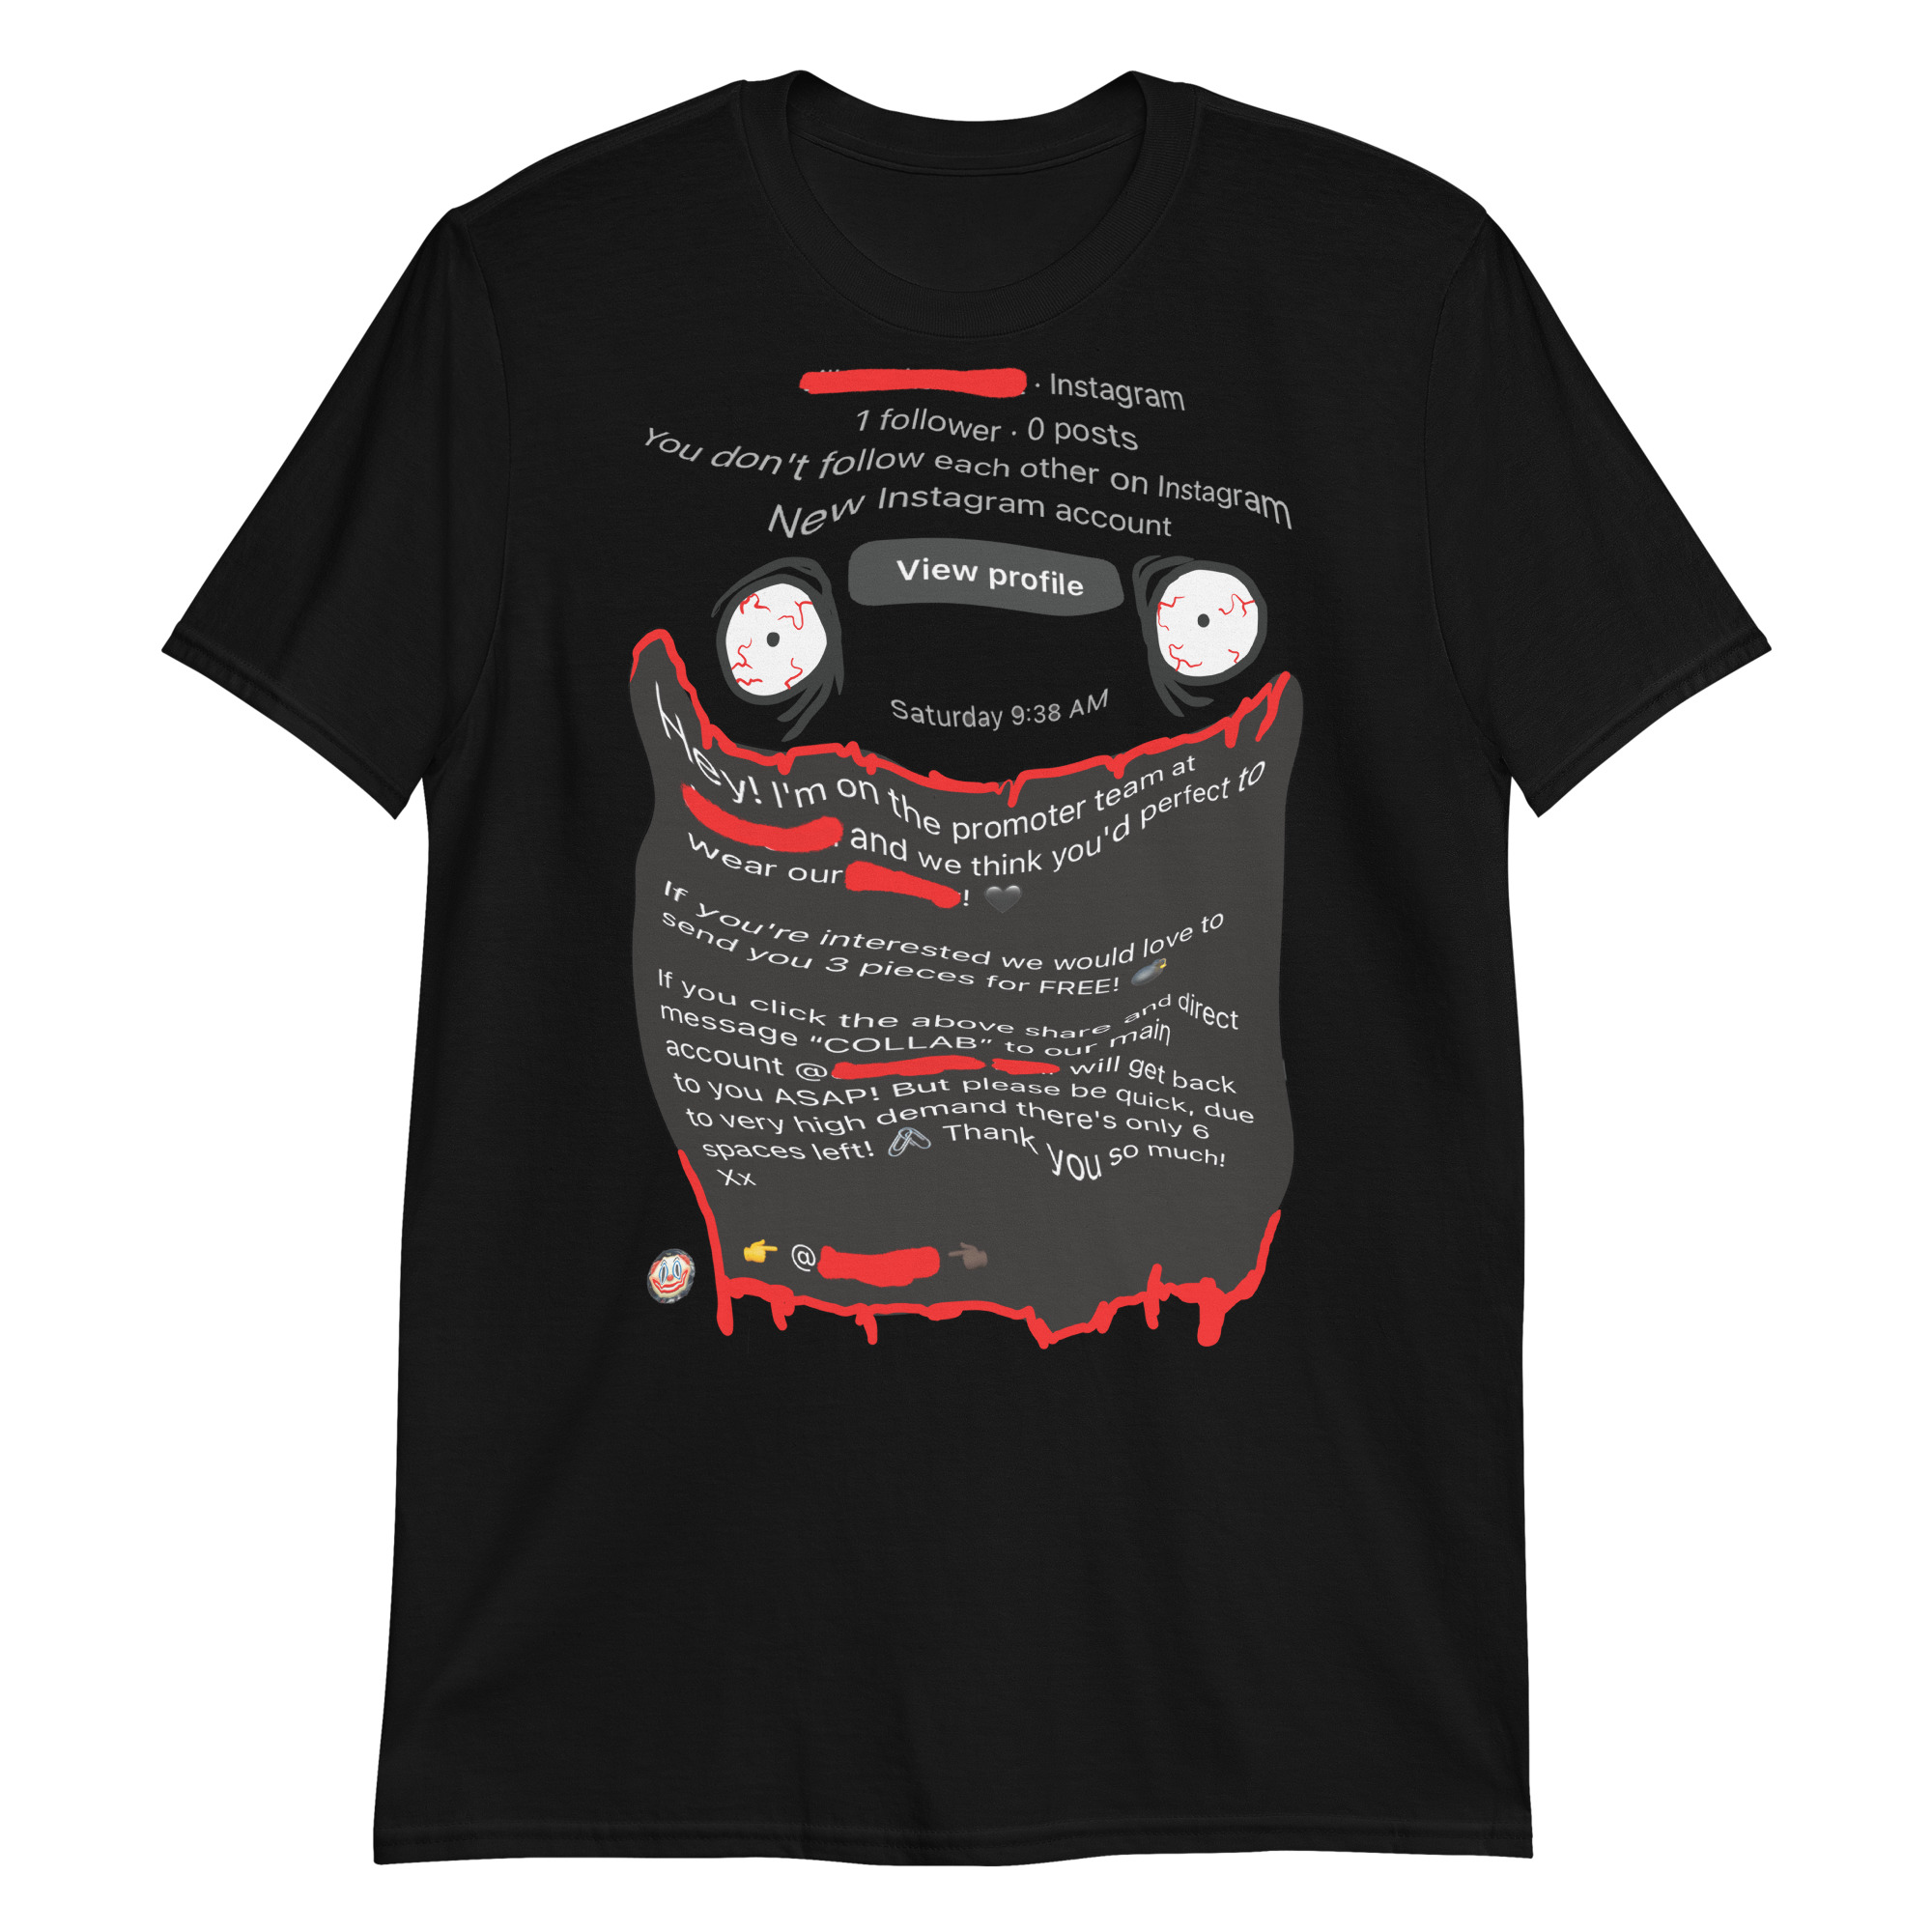 Featured image for “IG Spam - Short-Sleeve Unisex T-Shirt”